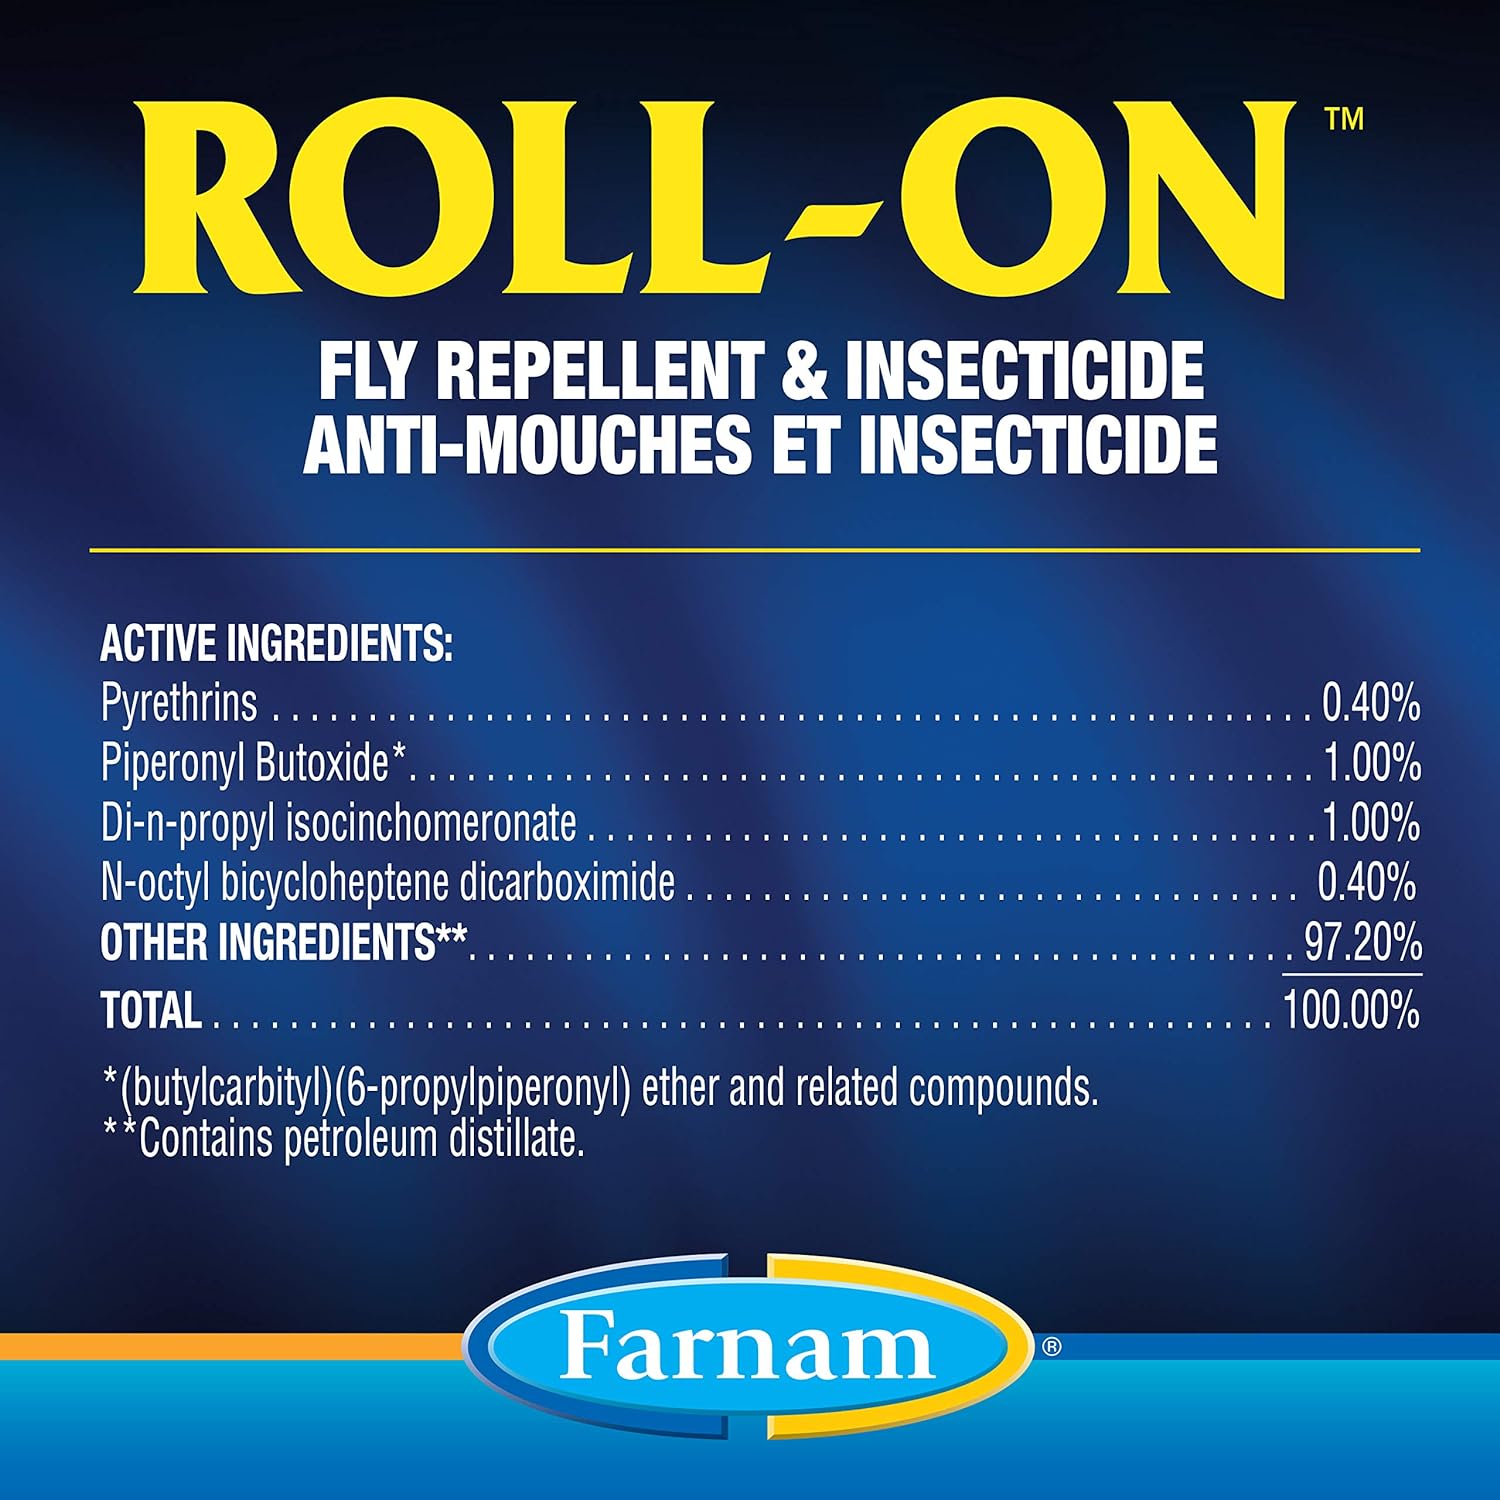 Farnam Roll-On Fly Repellent for Horses, Ponies and Dogs 2 Ounces : Farnam/VPL Central Life Sciences: Pet Supplies